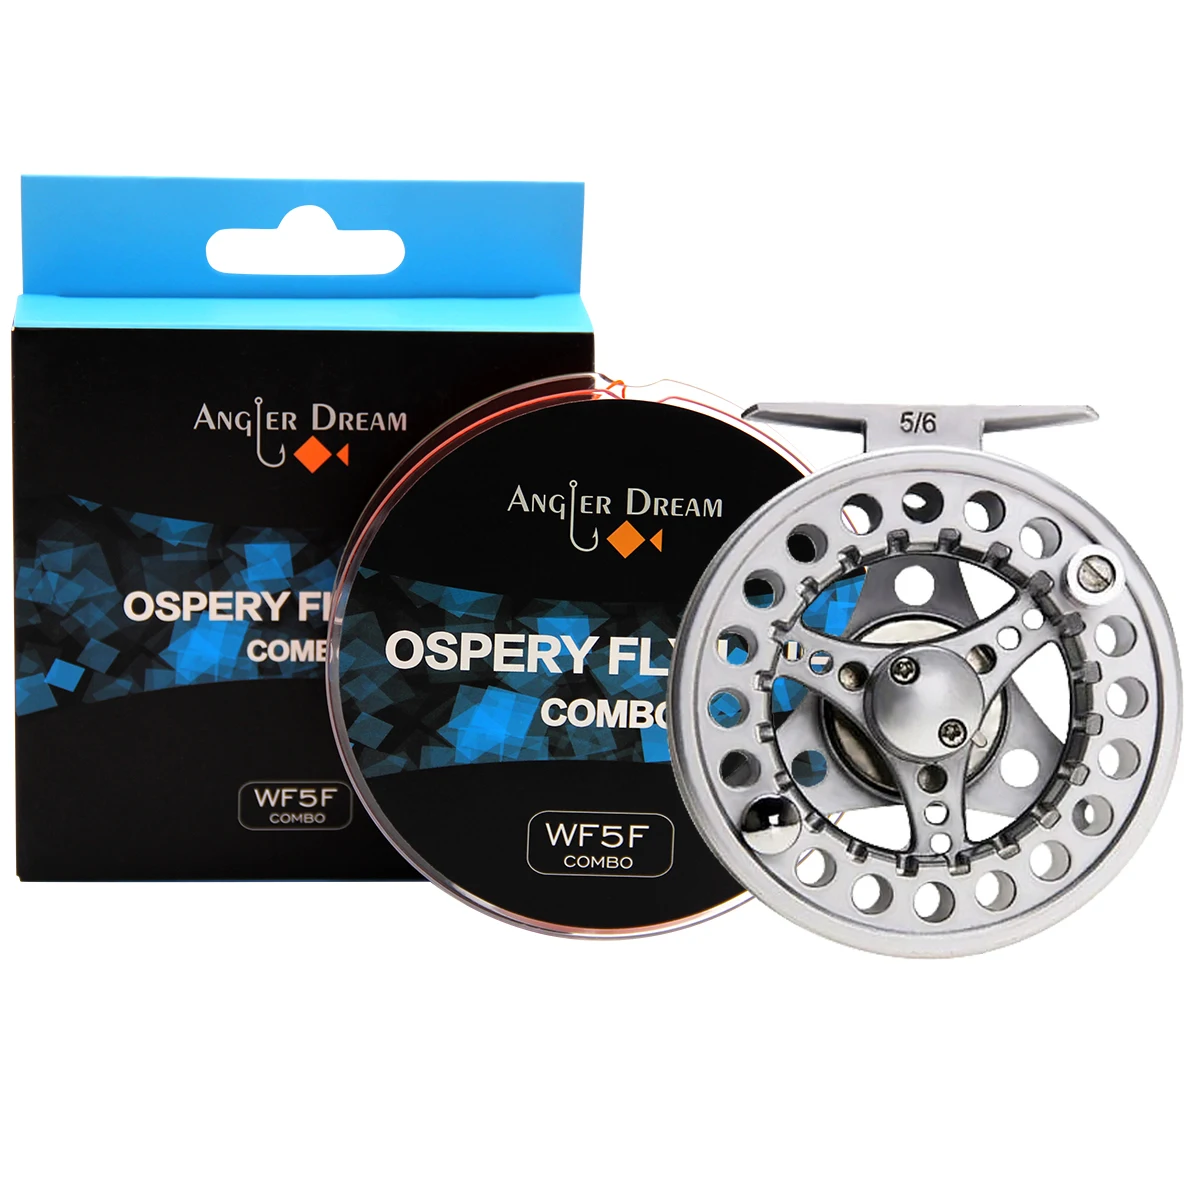 1/2 3/4 5/6 7/8WT Silver Aluminum Large Arbor Fly Fishing Reel With WF  2/3/5/8F Fly Fishing Line Combo